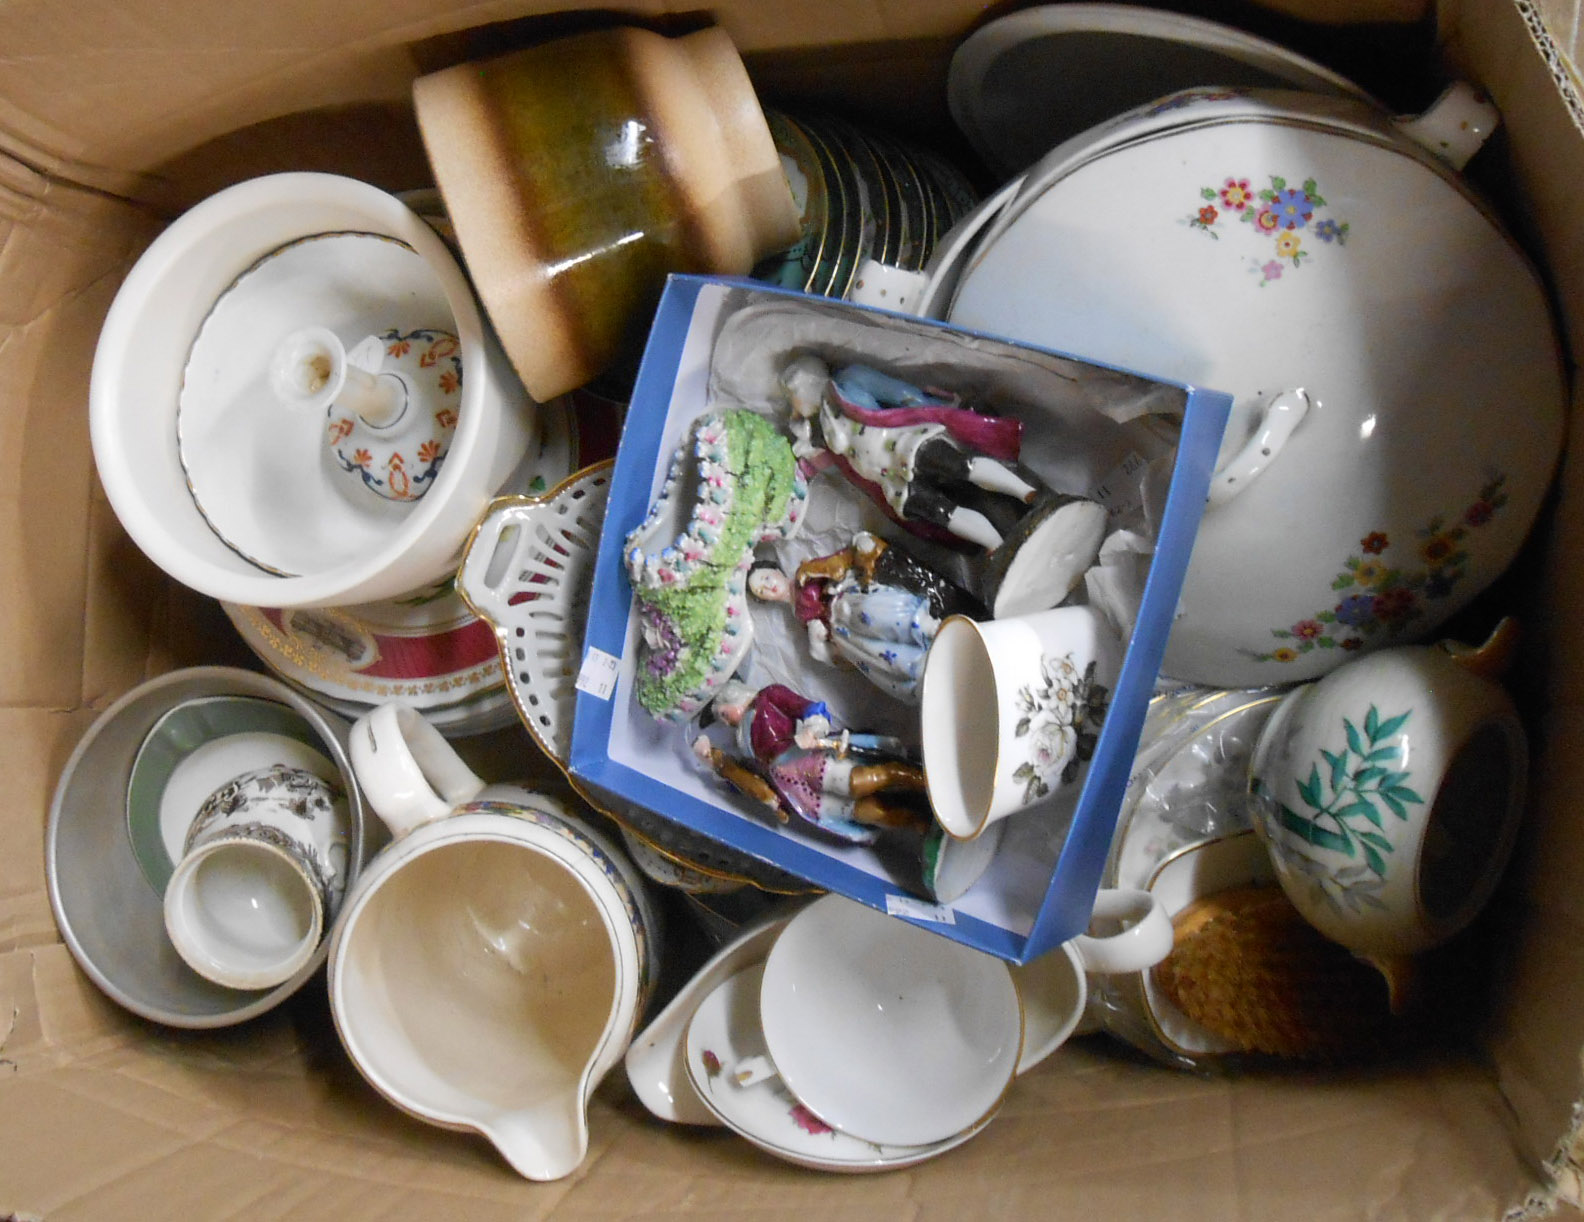 A box containing a large quantity of assorted ceramic items including jugs, plates, figurines, etc.